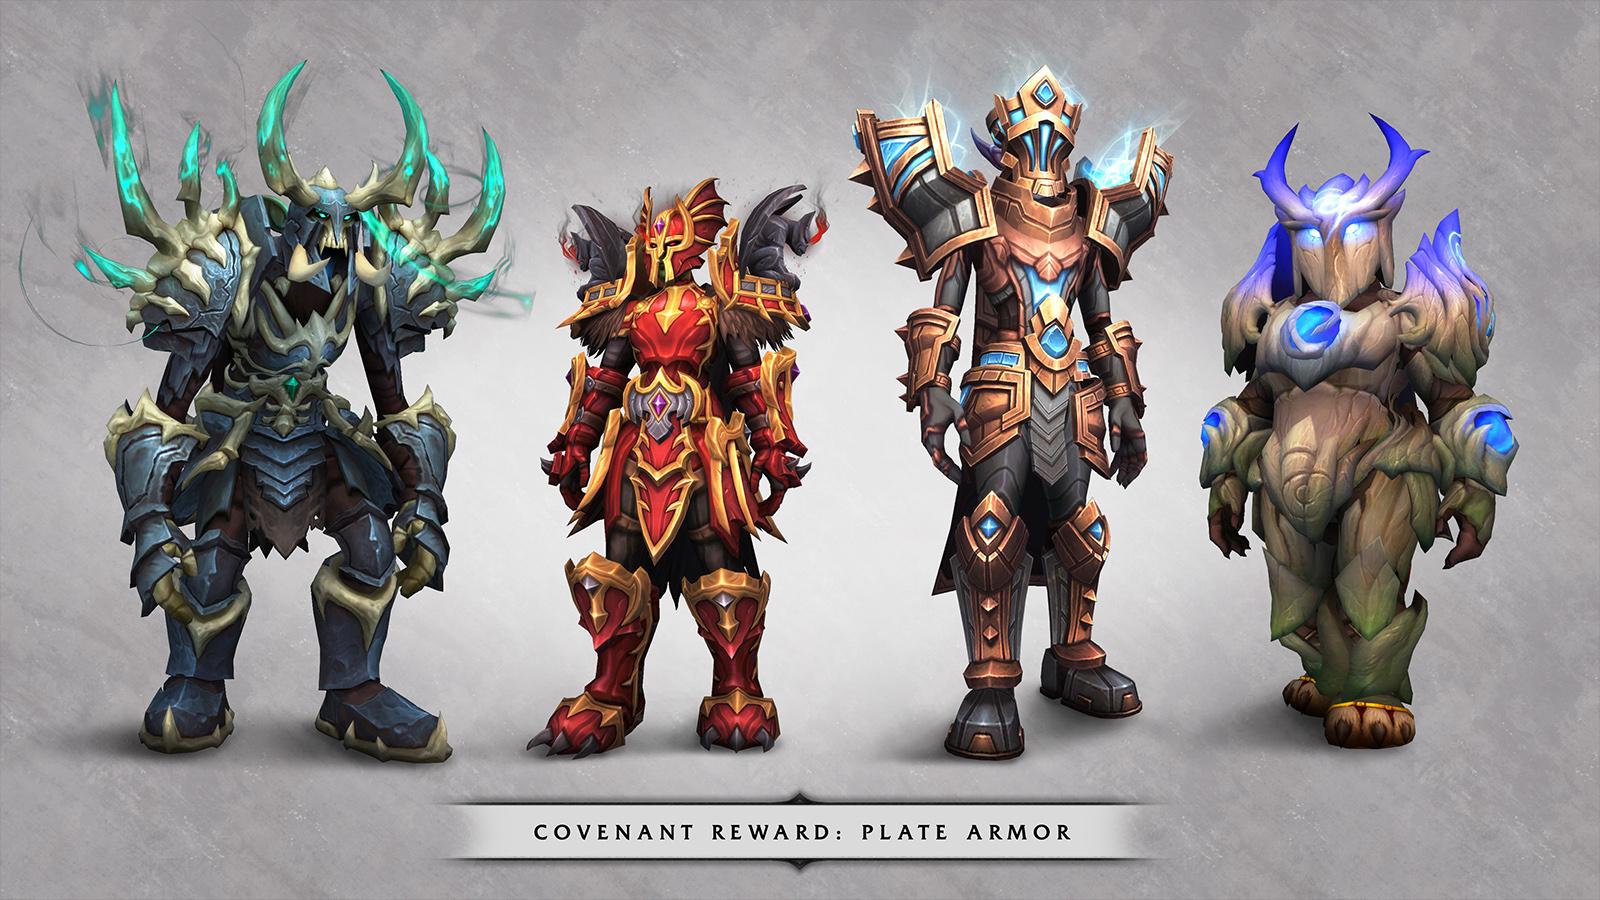 Picture of Plat Armor rewards for Covenants